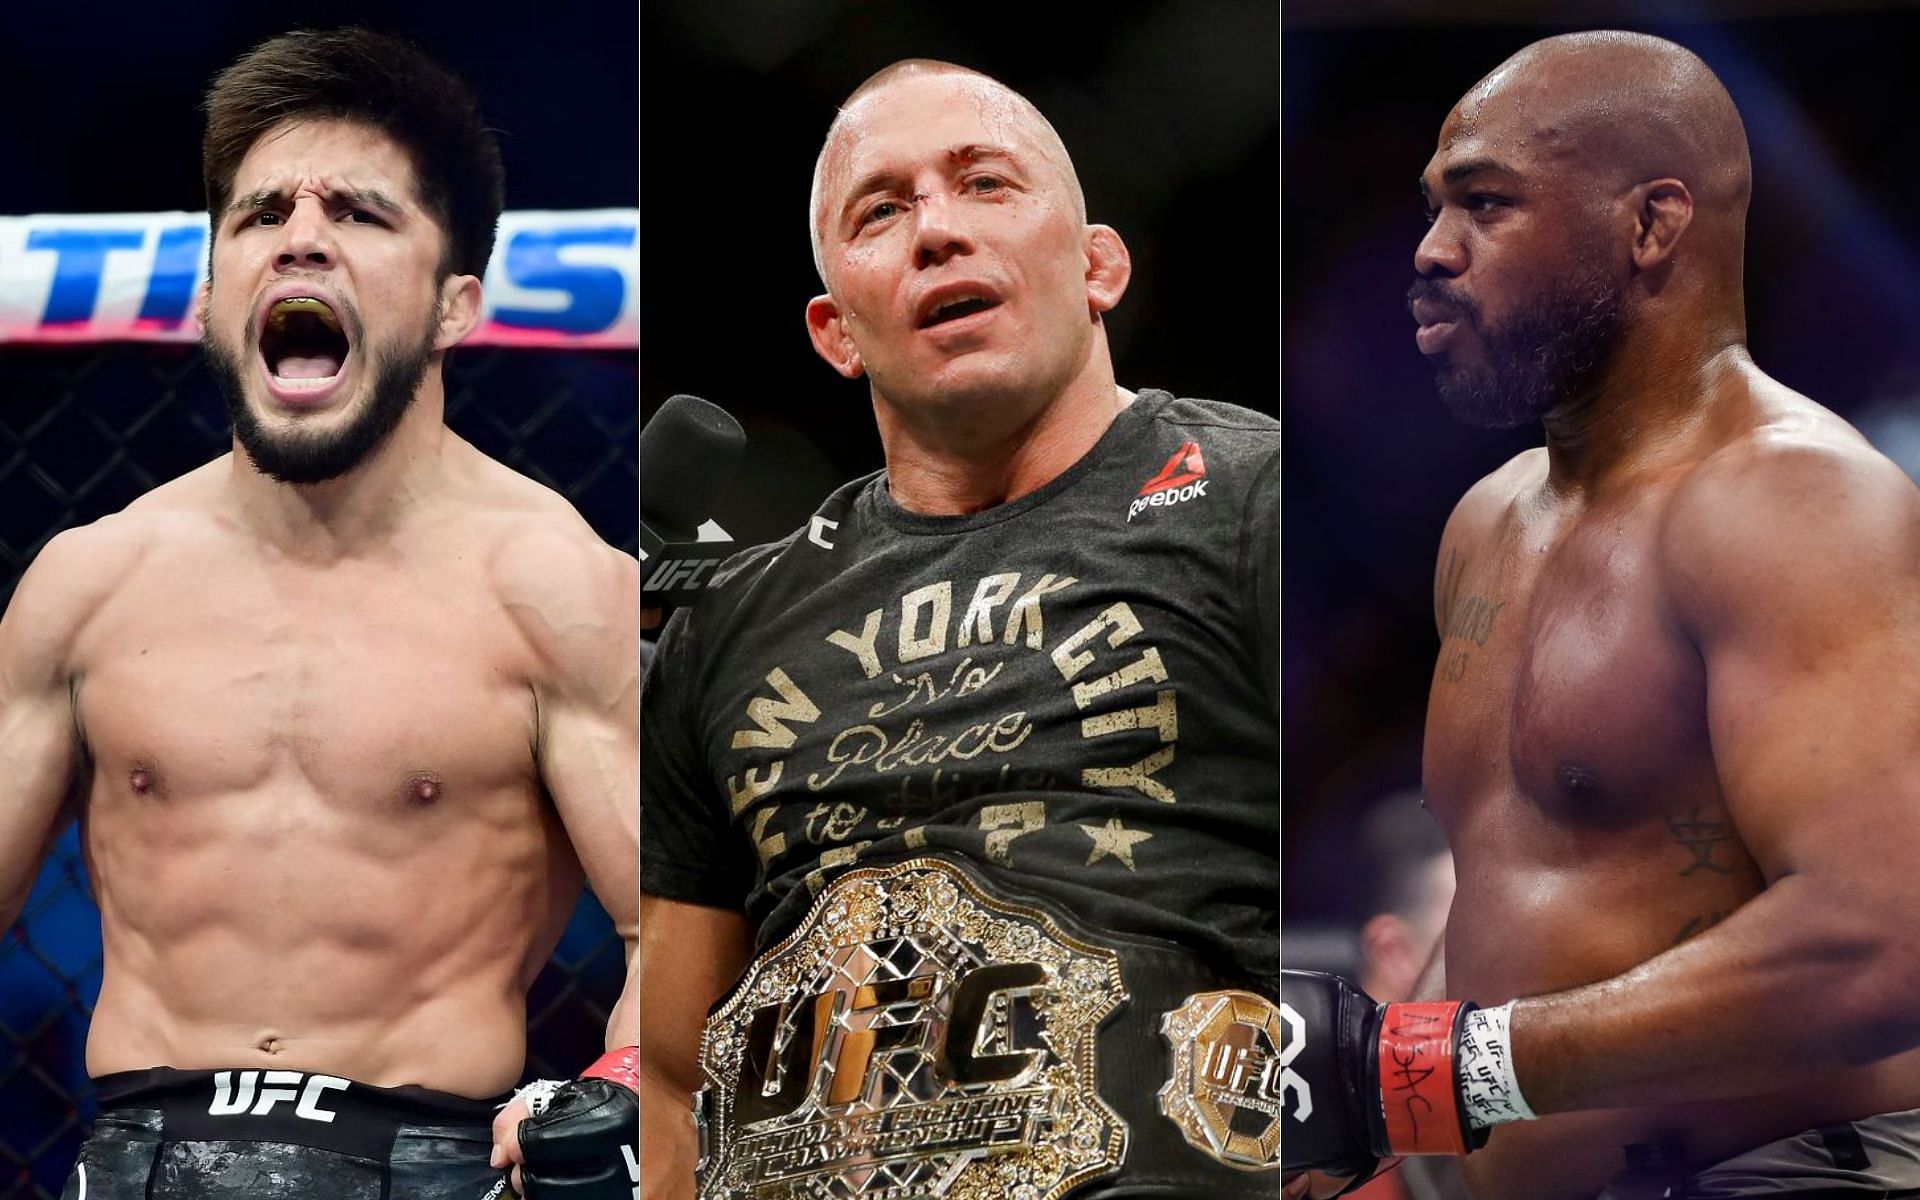 The 10 best UFC fighters of all time